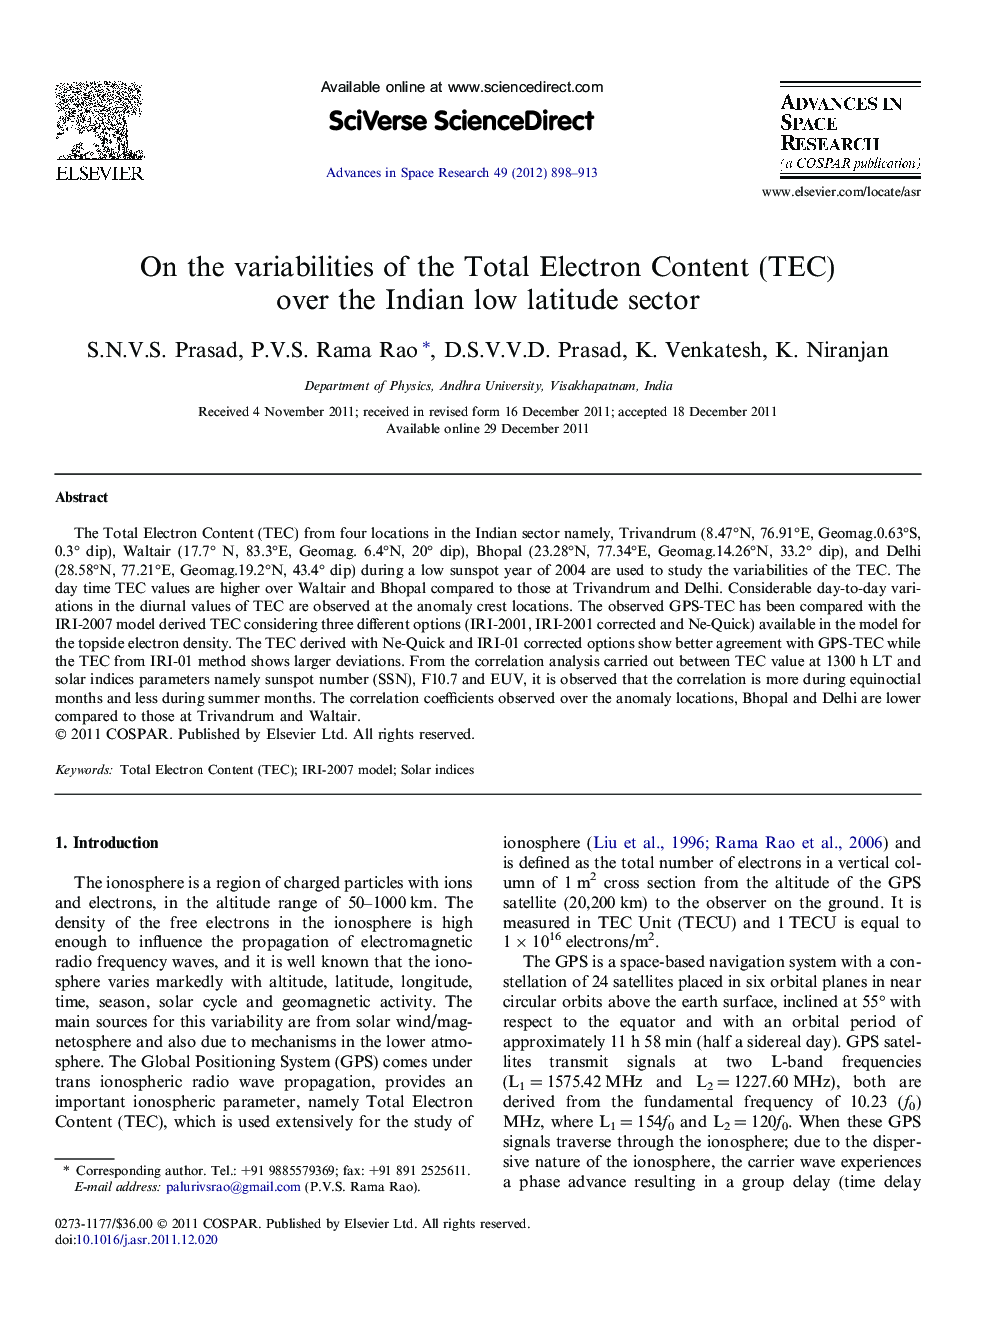 On the variabilities of the Total Electron Content (TEC) over the Indian low latitude sector